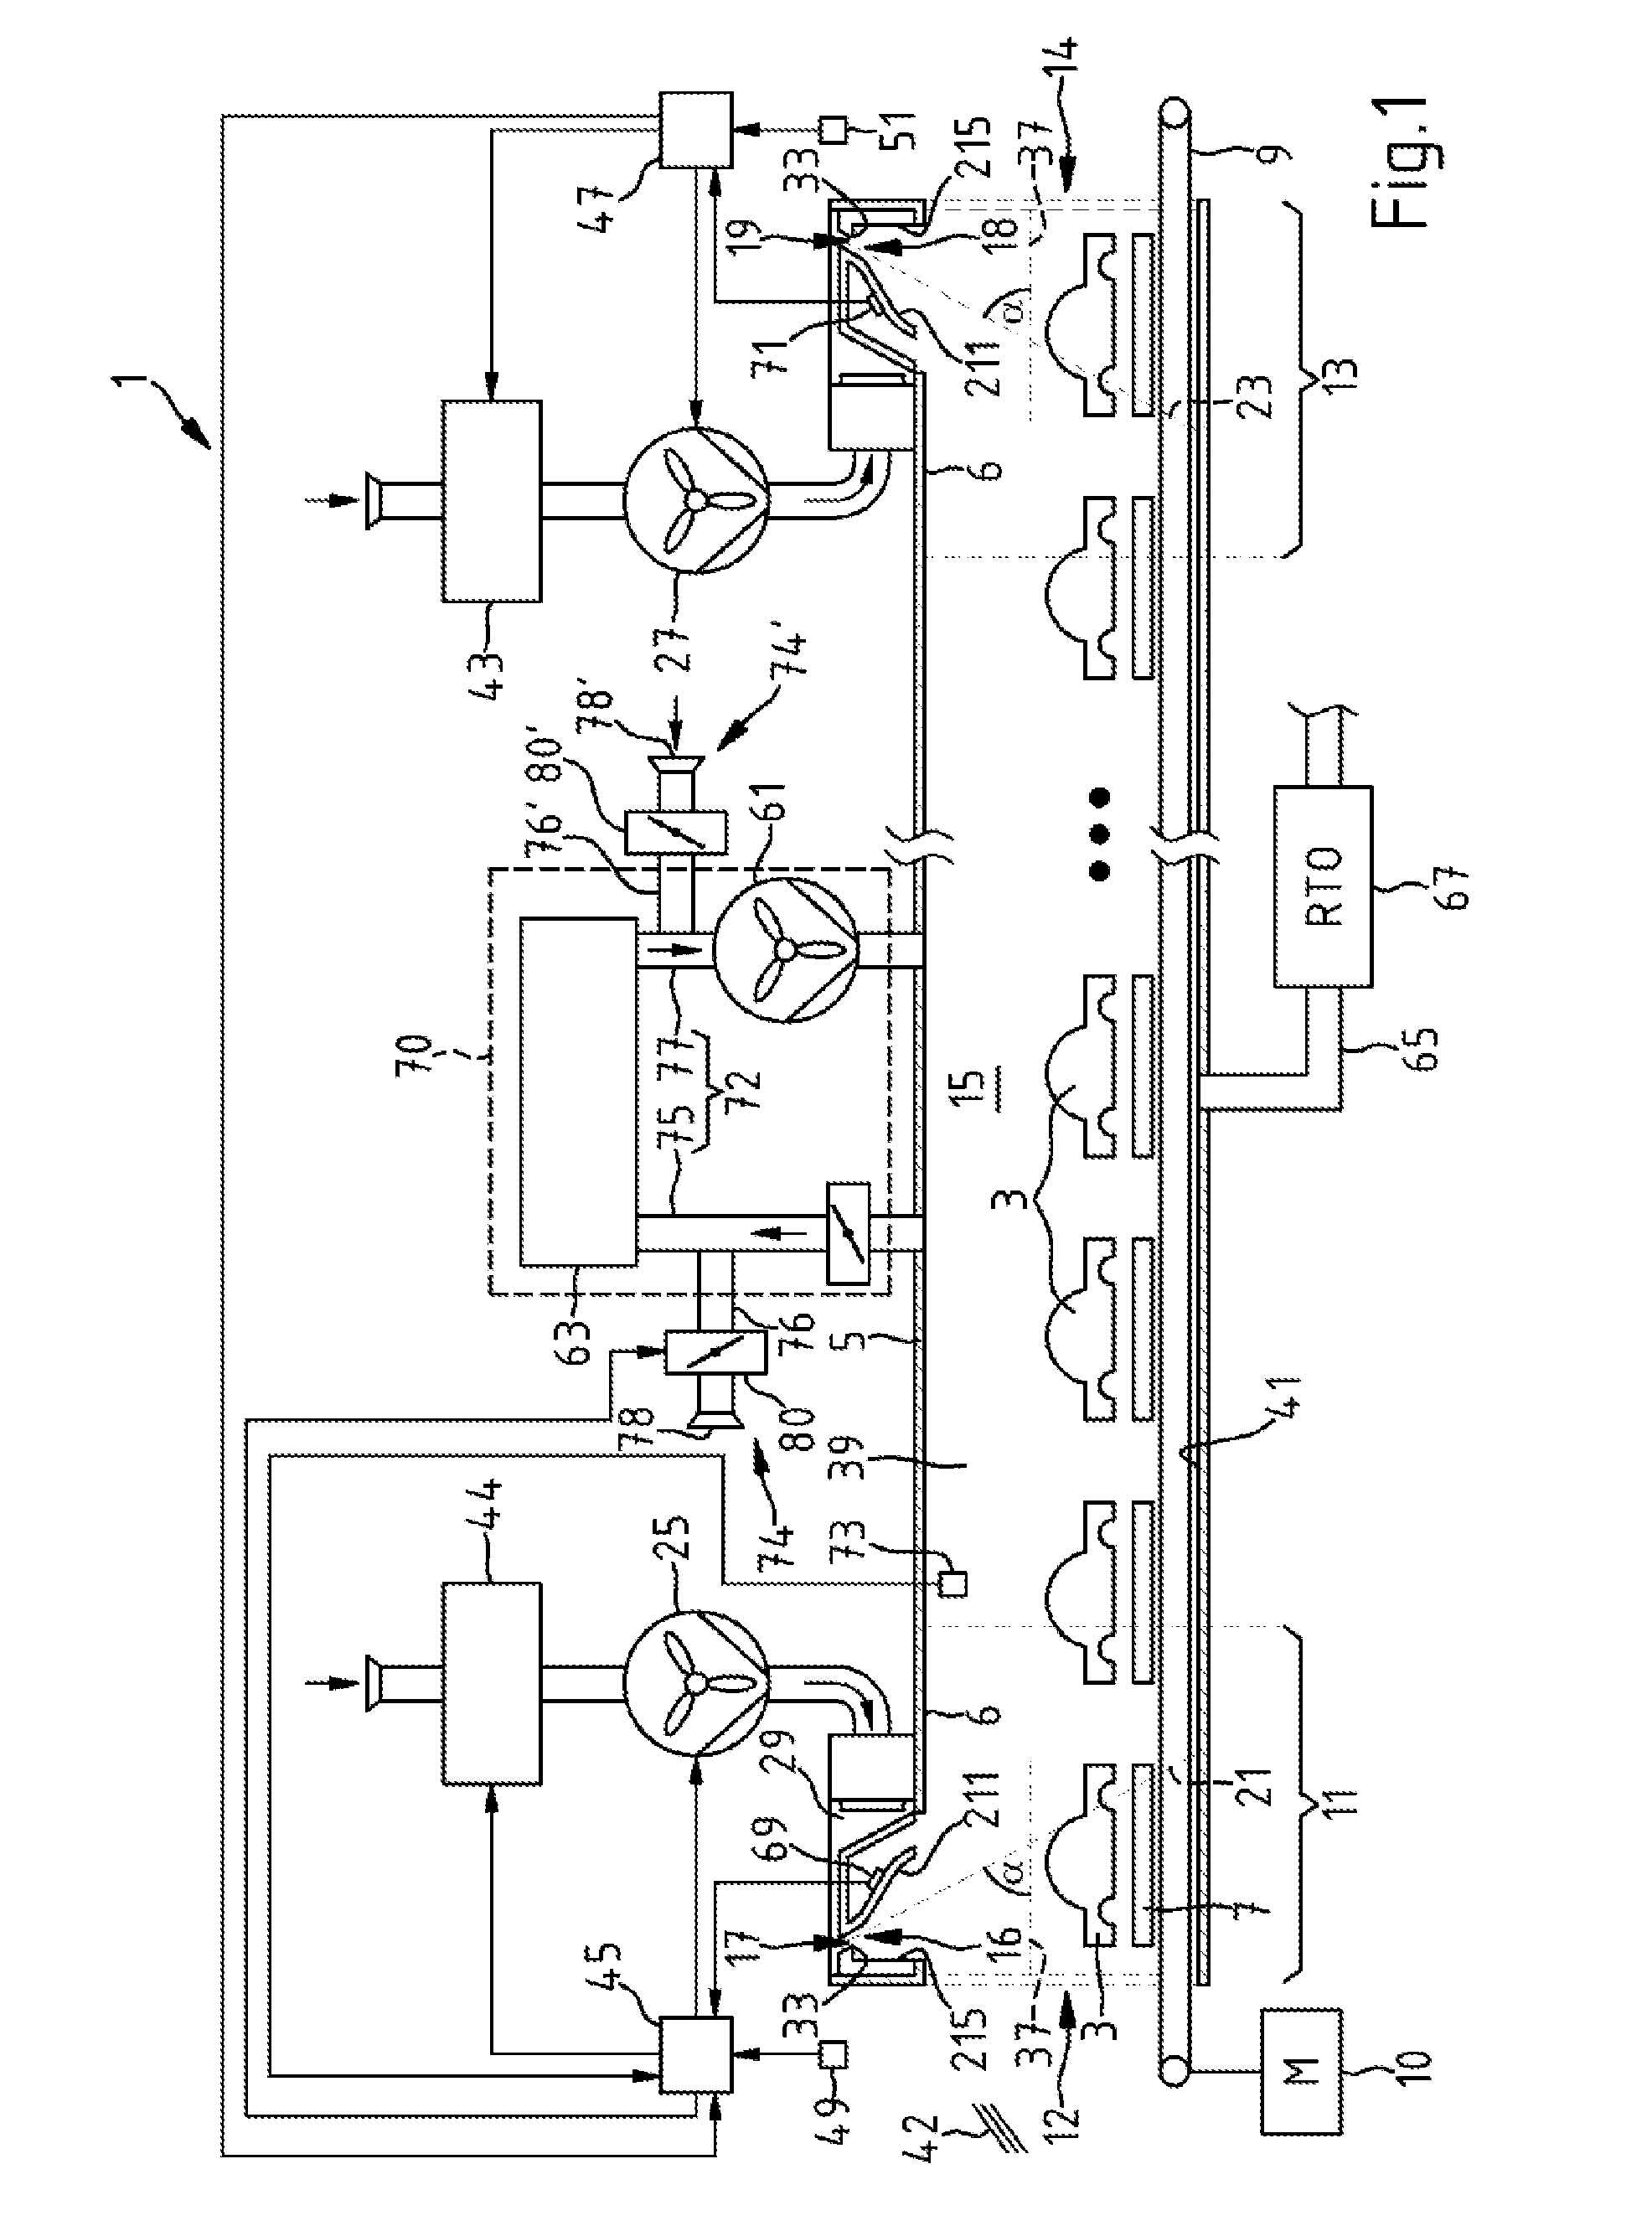 System having a process chamber for workpieces